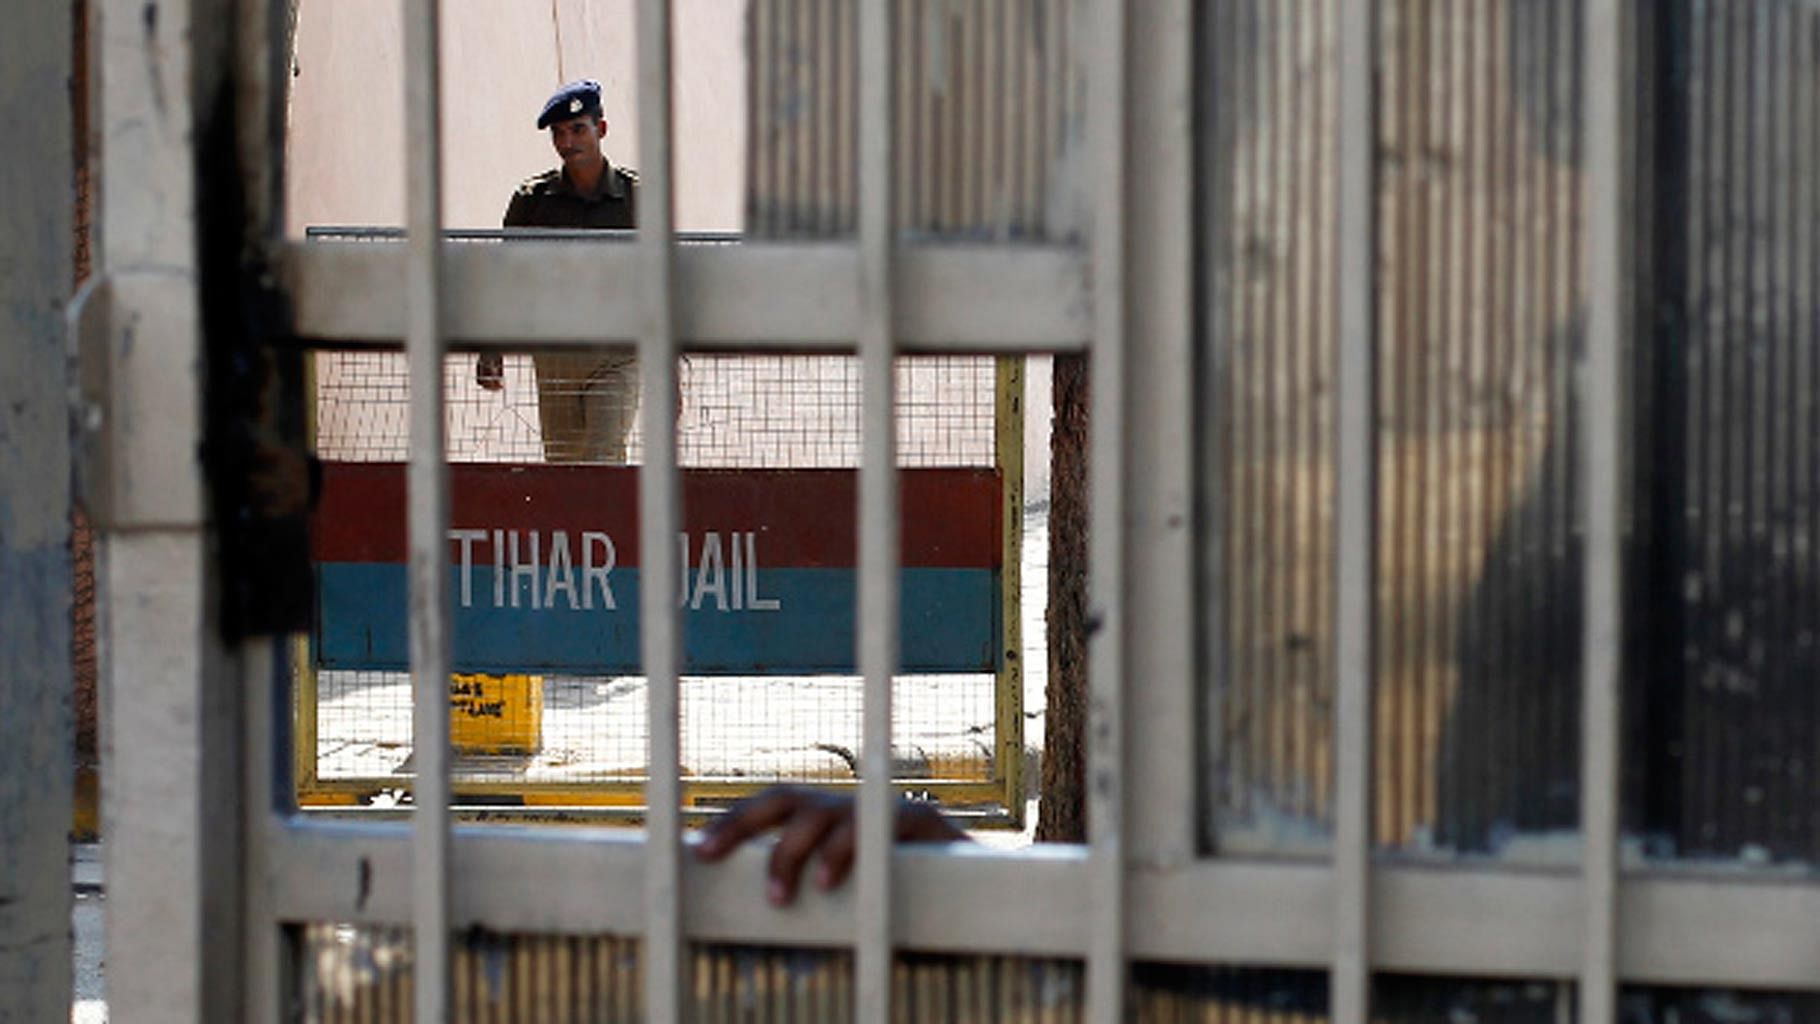 Tihar Prison authorities in Delhi said they are planning to release around 3,000 prisoners to ease congestion in jails over the coronavirus threat.